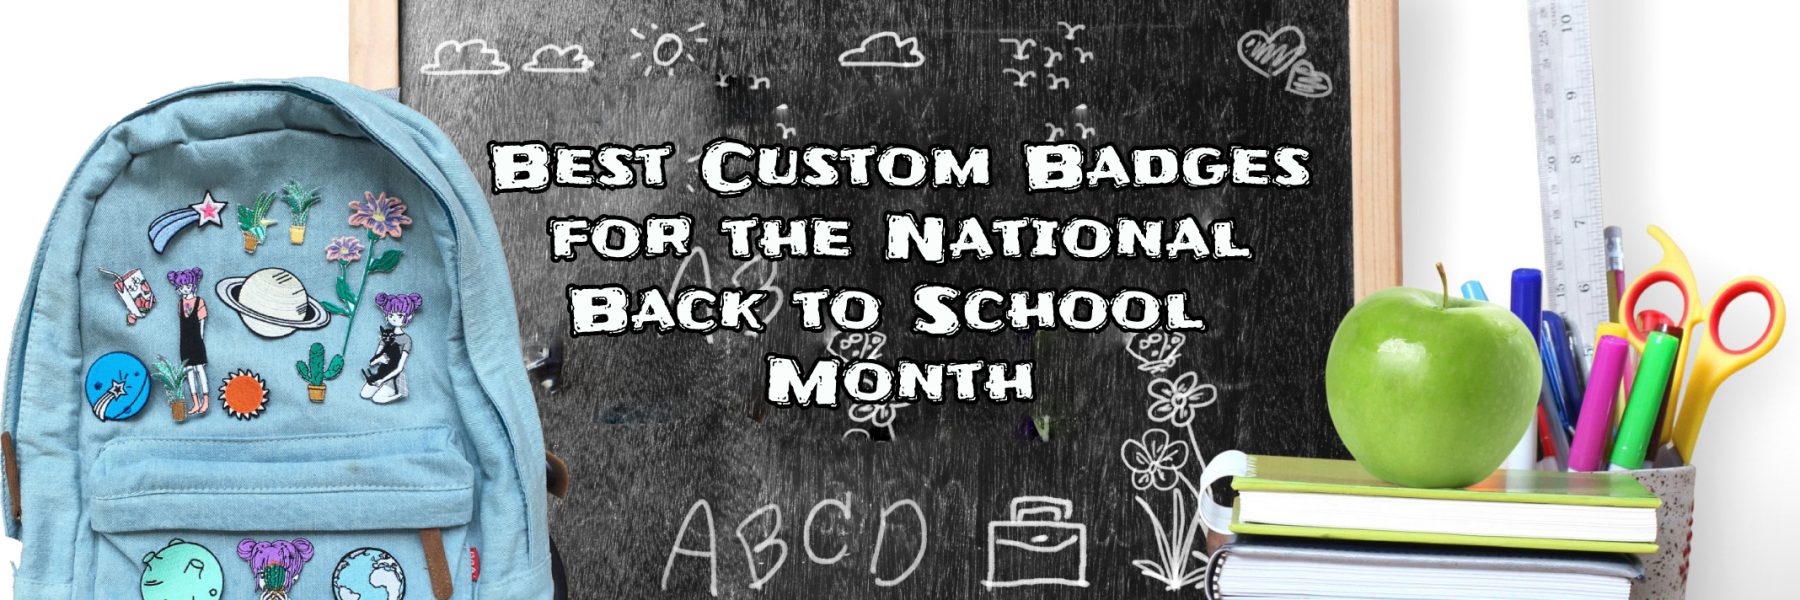 Best Custom Badges for the National Back to School Month